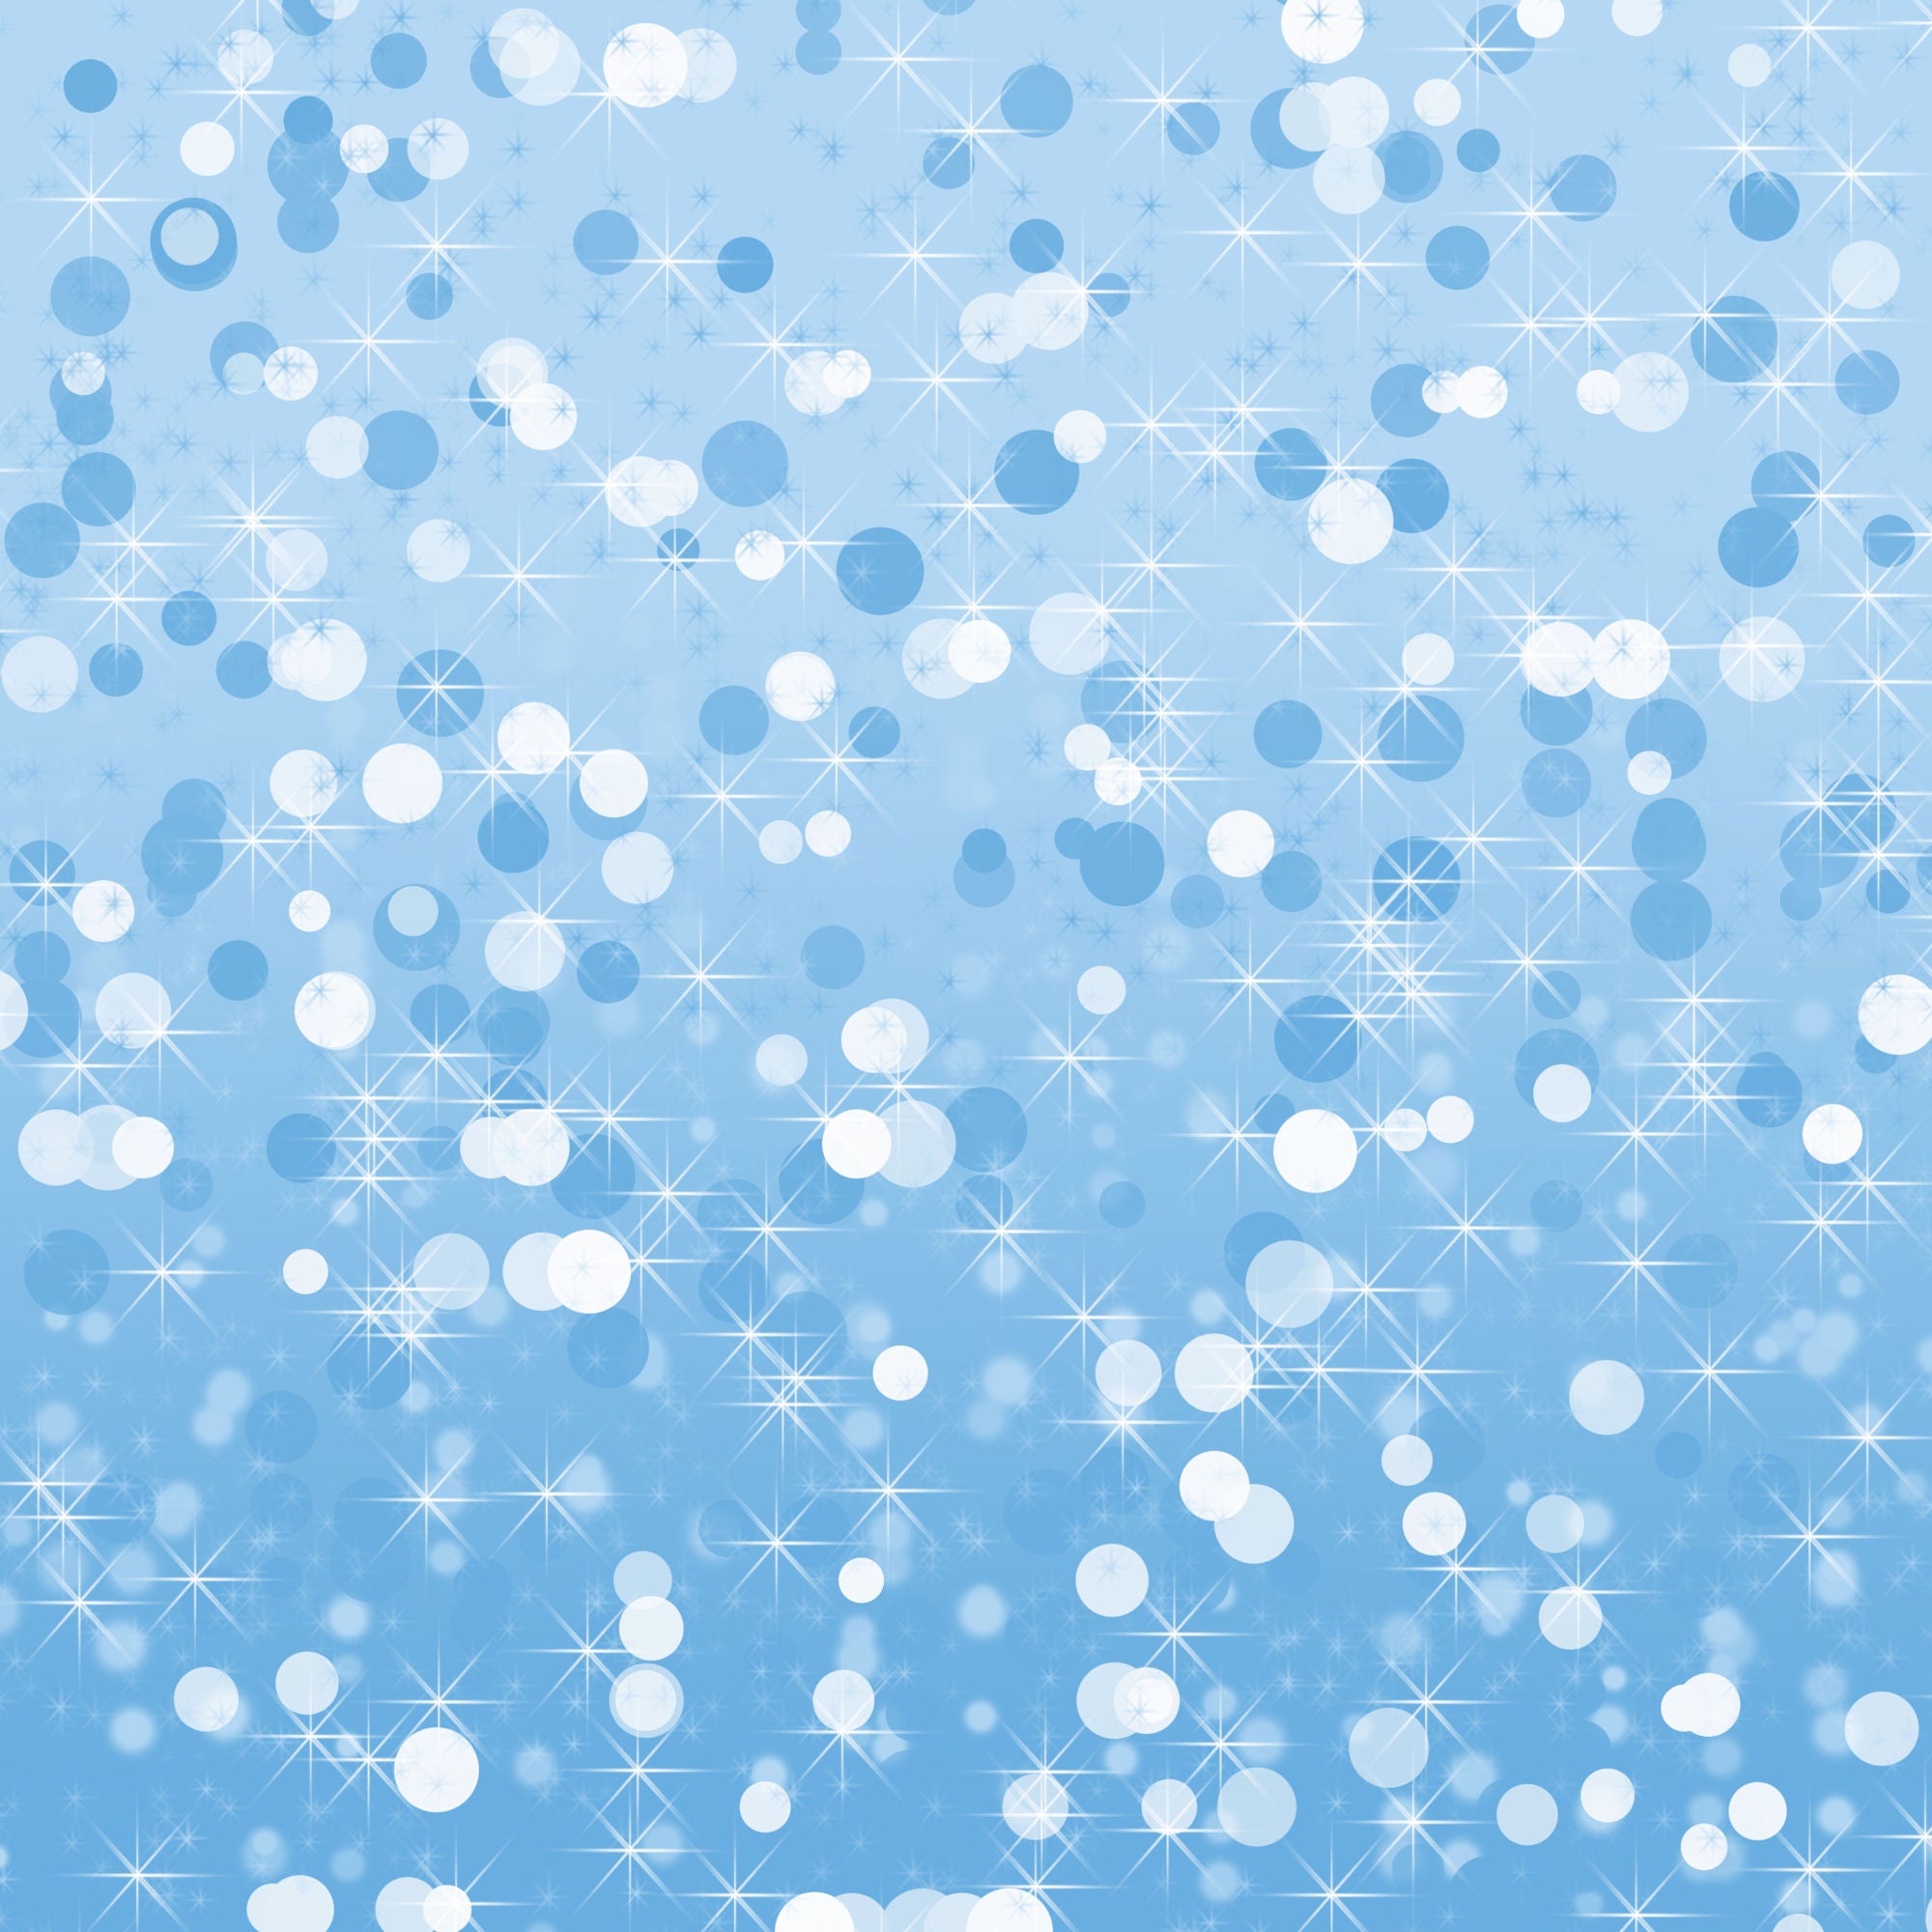 Inspired By Collection Blue Princess 12 x 12 Double-Sided Scrapbook Paper by SSC Designs